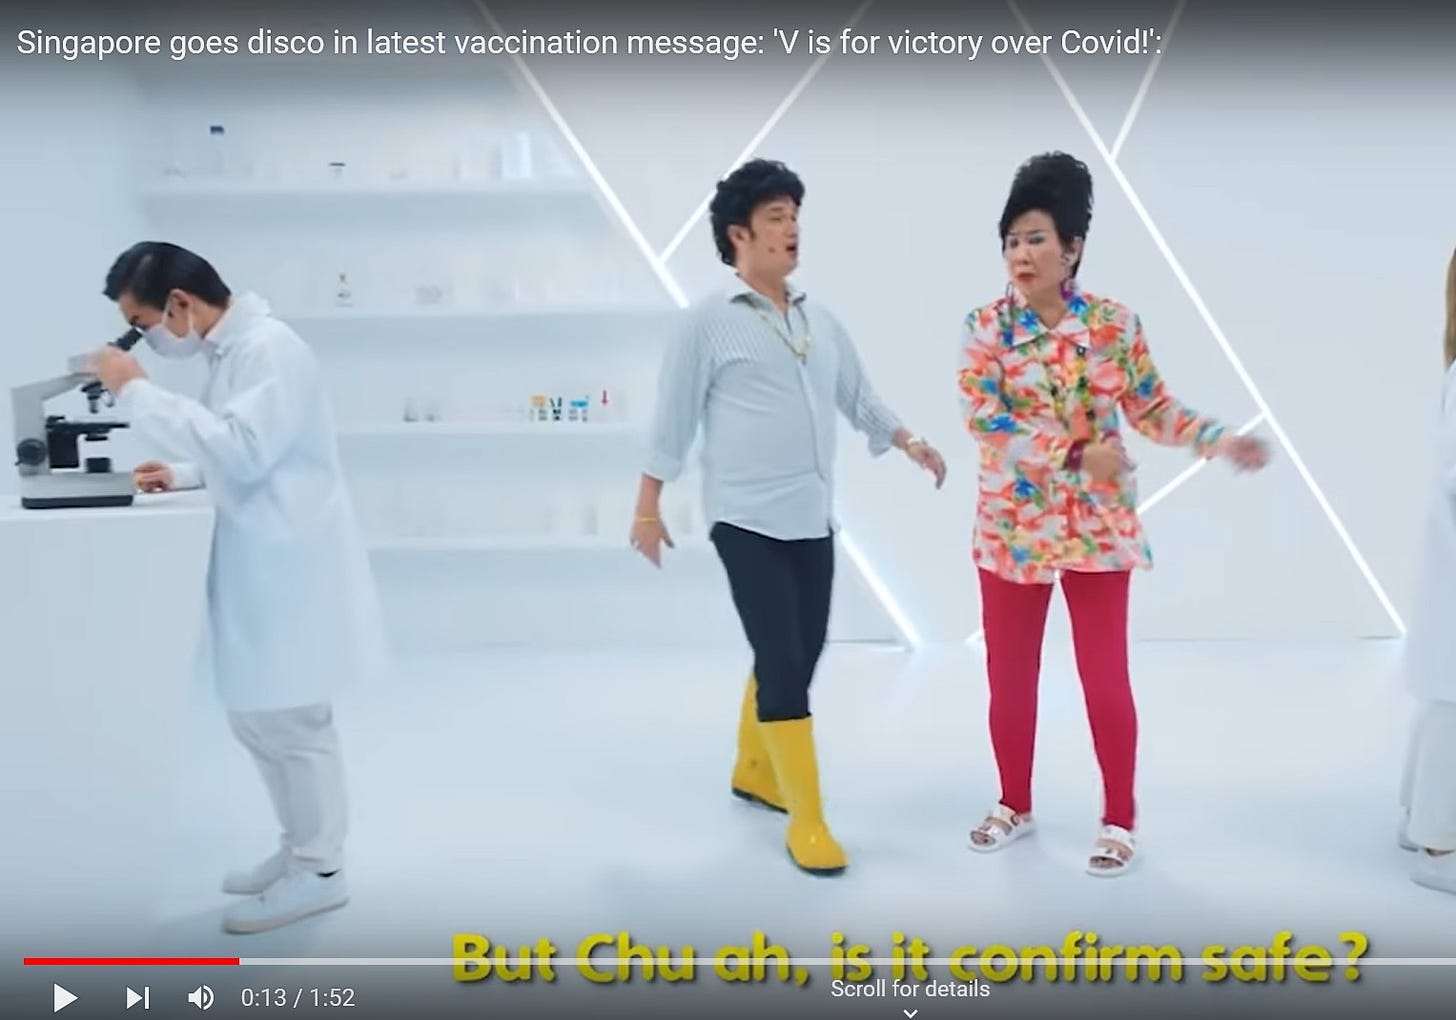 May be an image of 3 people, people standing and text that says "Singapore goes disco in latest vaccination message: is for victory over Covid!': � 0:13/1:52 1:52 But Chu ah, Scroll for details safe?"